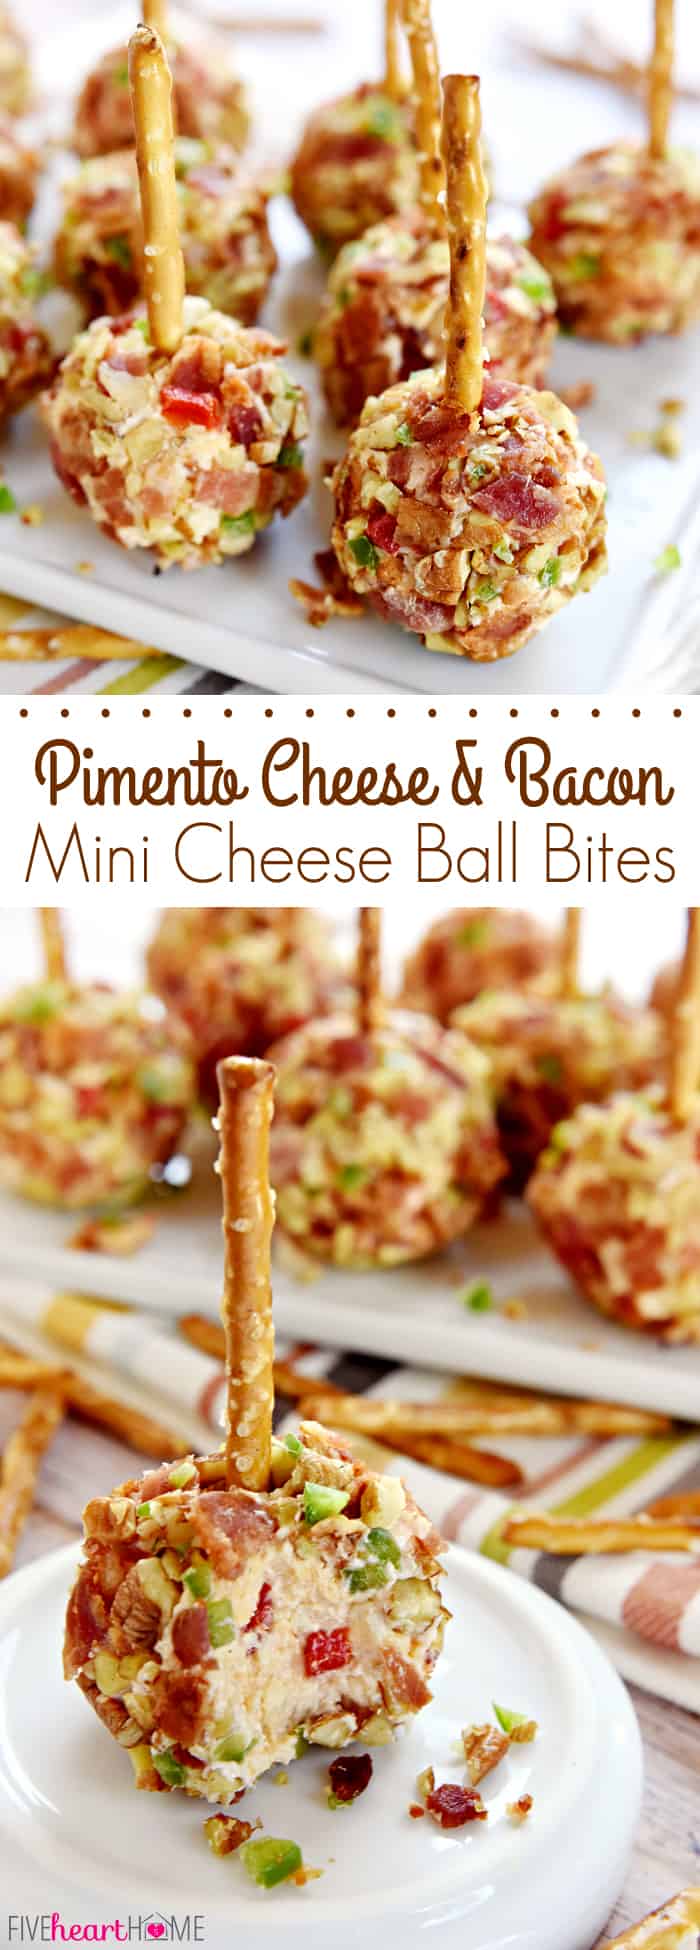 Pimento Cheese & Bacon Mini Cheese Ball Bites ~ mini cheese balls made of homemade pimento cheese, rolled in a coating of crispy bacon, toasted pecans, and minced fresh jalapeños, and then speared with a pretzel stick for fun, easy-to-eat appetizers! | FiveHeartHome.com via @fivehearthome